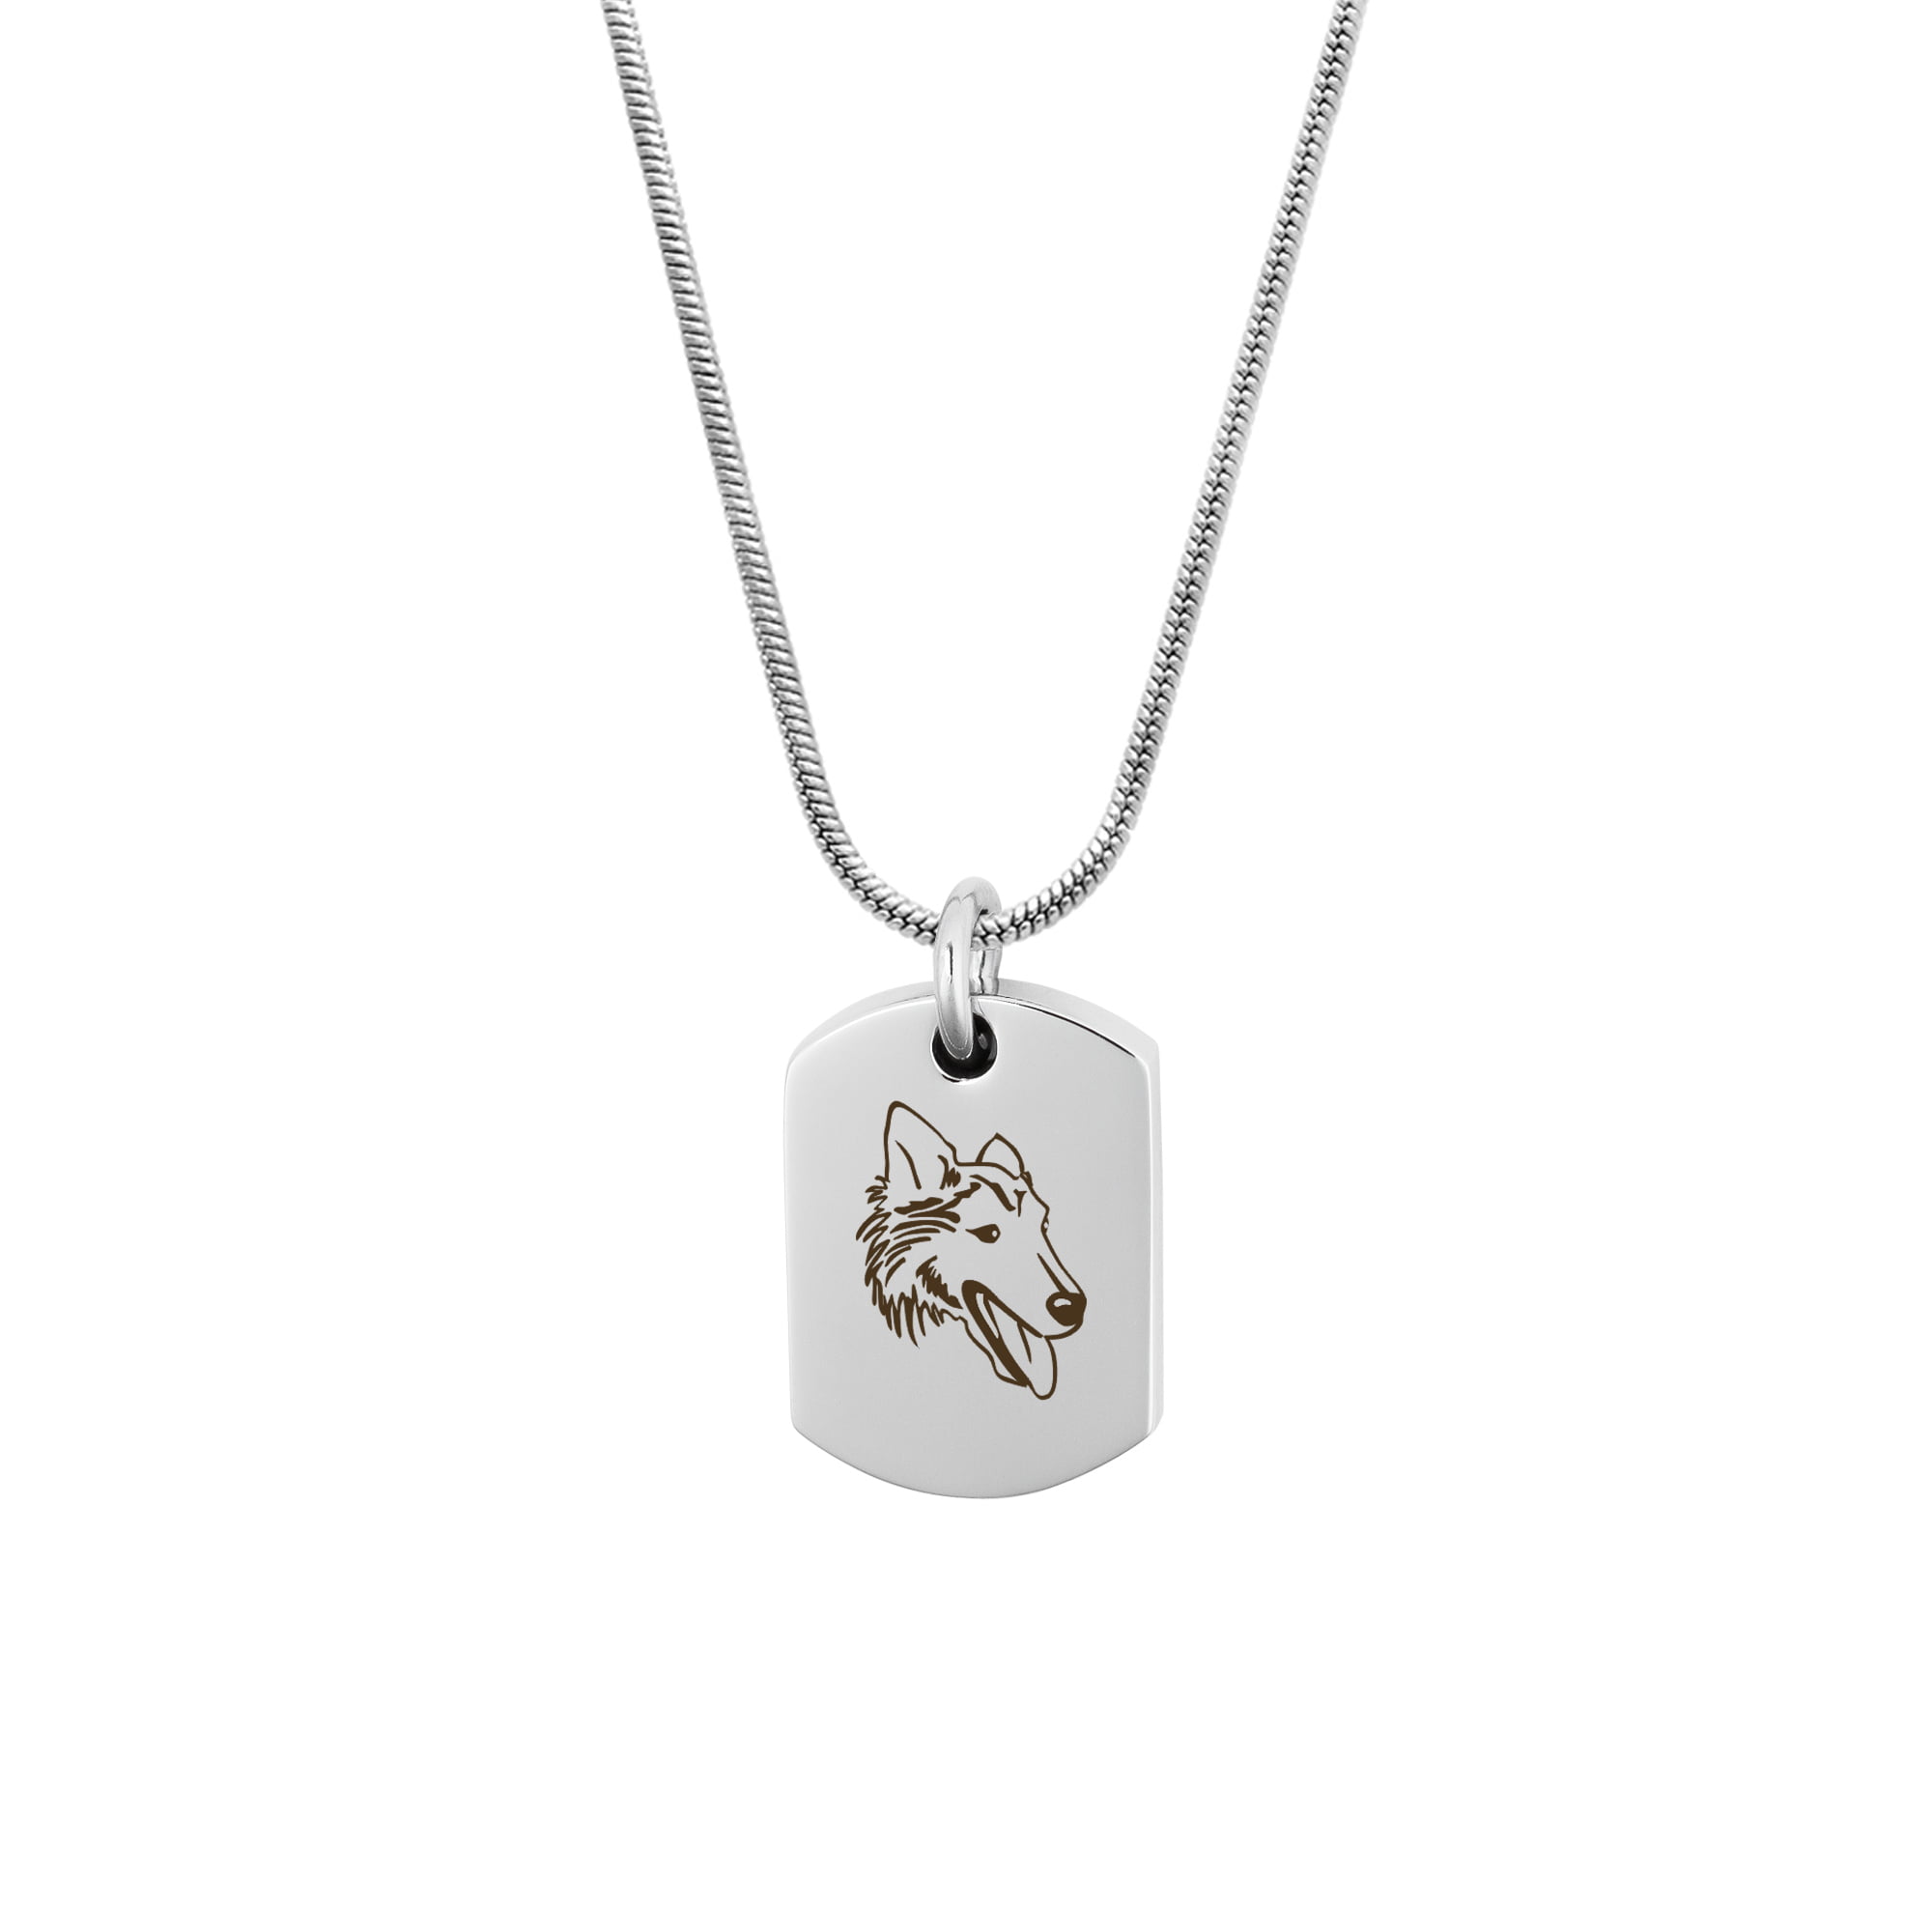 Ashes Memorial Inlaid Heart Necklace By Ashes Memorial Jewellery |  notonthehighstreet.com